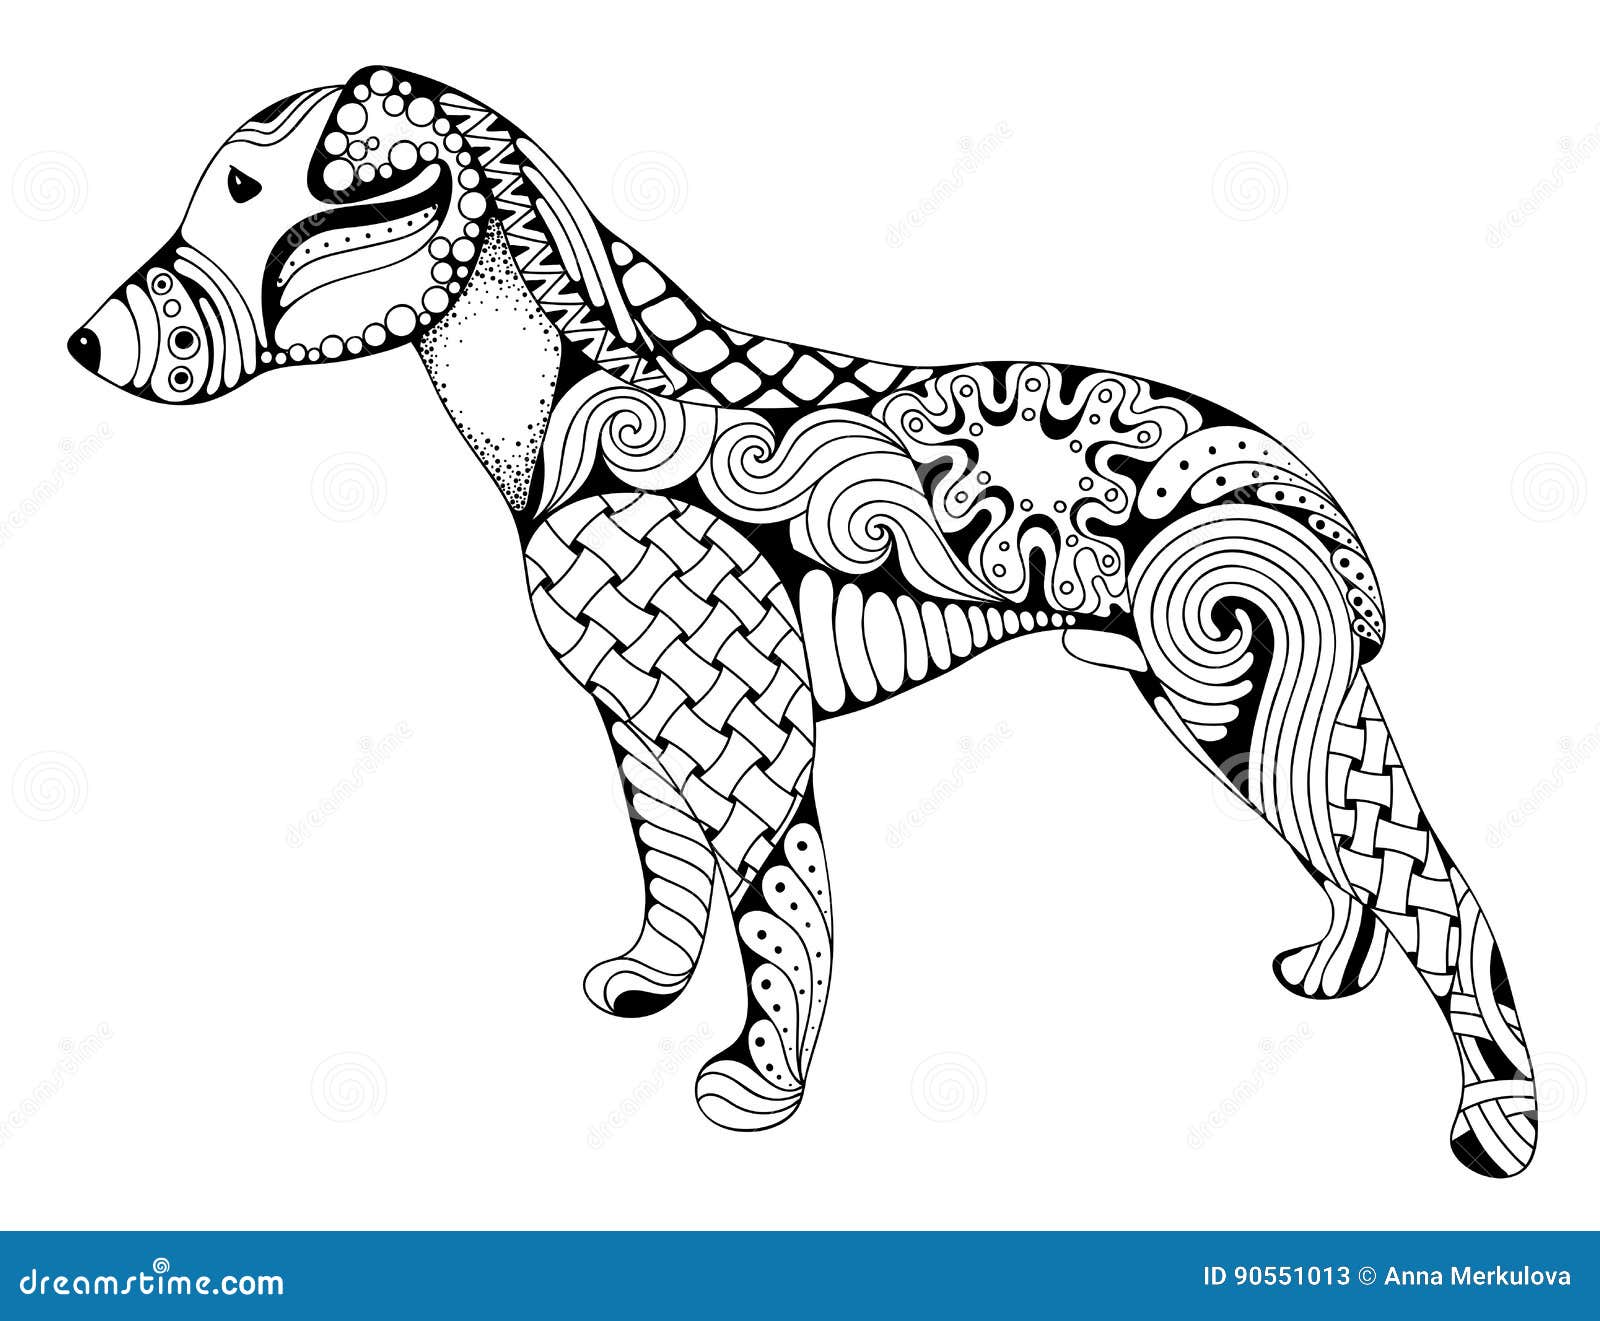 Bloodhound Cartoons, Illustrations & Vector Stock Images - 182 Pictures